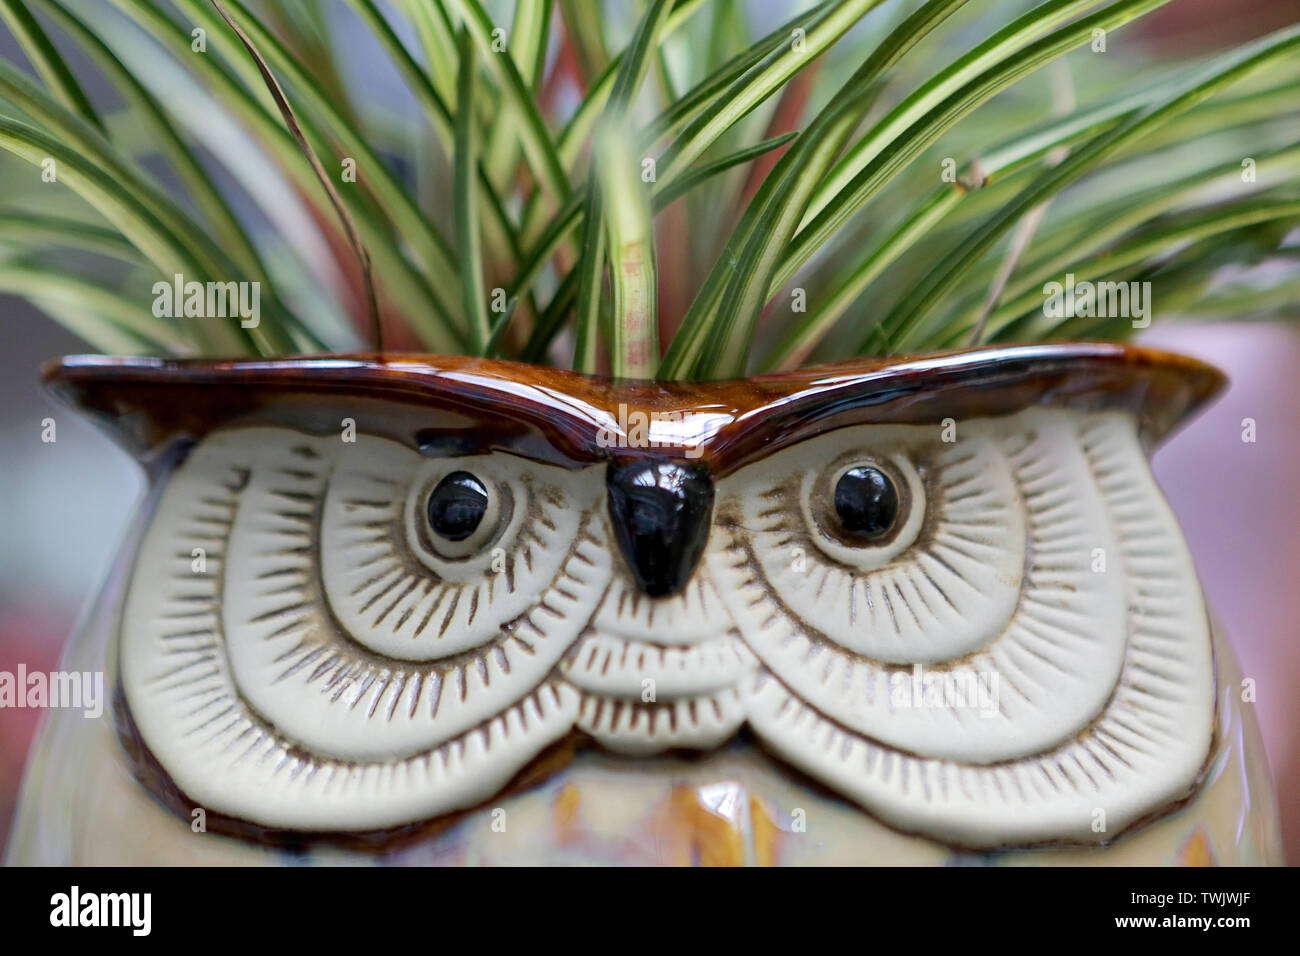 Pasay, Philippines. 21st June, 2019. An owl-shaped vase is seen during the Cactus, Succulent, and Bromeliad Festival at a mall in Pasay City, the Philippines, June 21, 2019. The four-day festival featuring plant exhibits, lectures and bazaar will run until June 23. Credit: Rouelle Umali/Xinhua/Alamy Live News Stock Photo